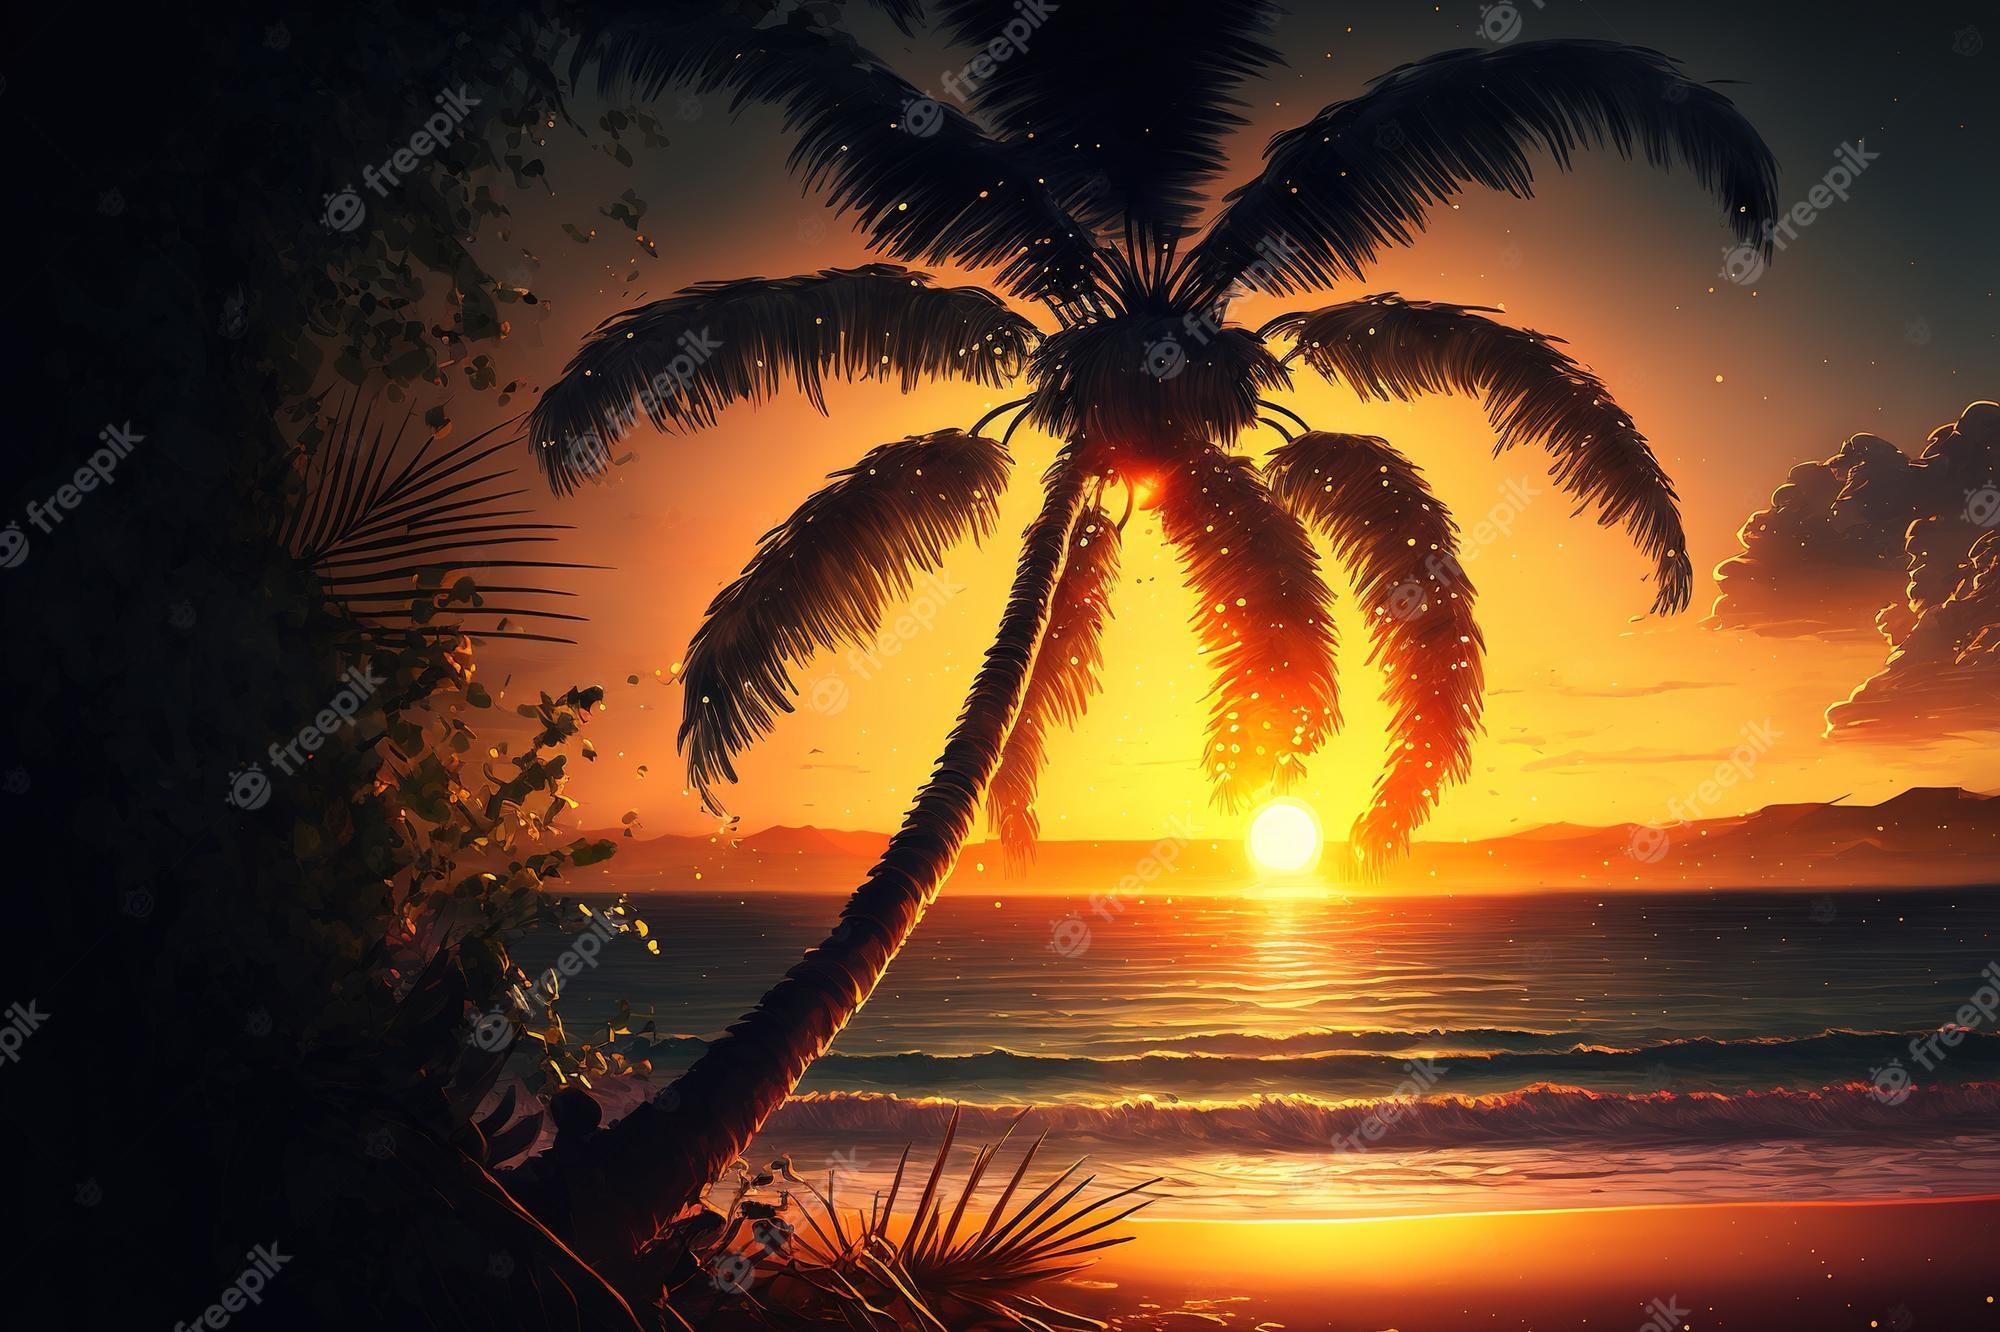 Premium Photo Background of a beach sunset with a coconut palm tree